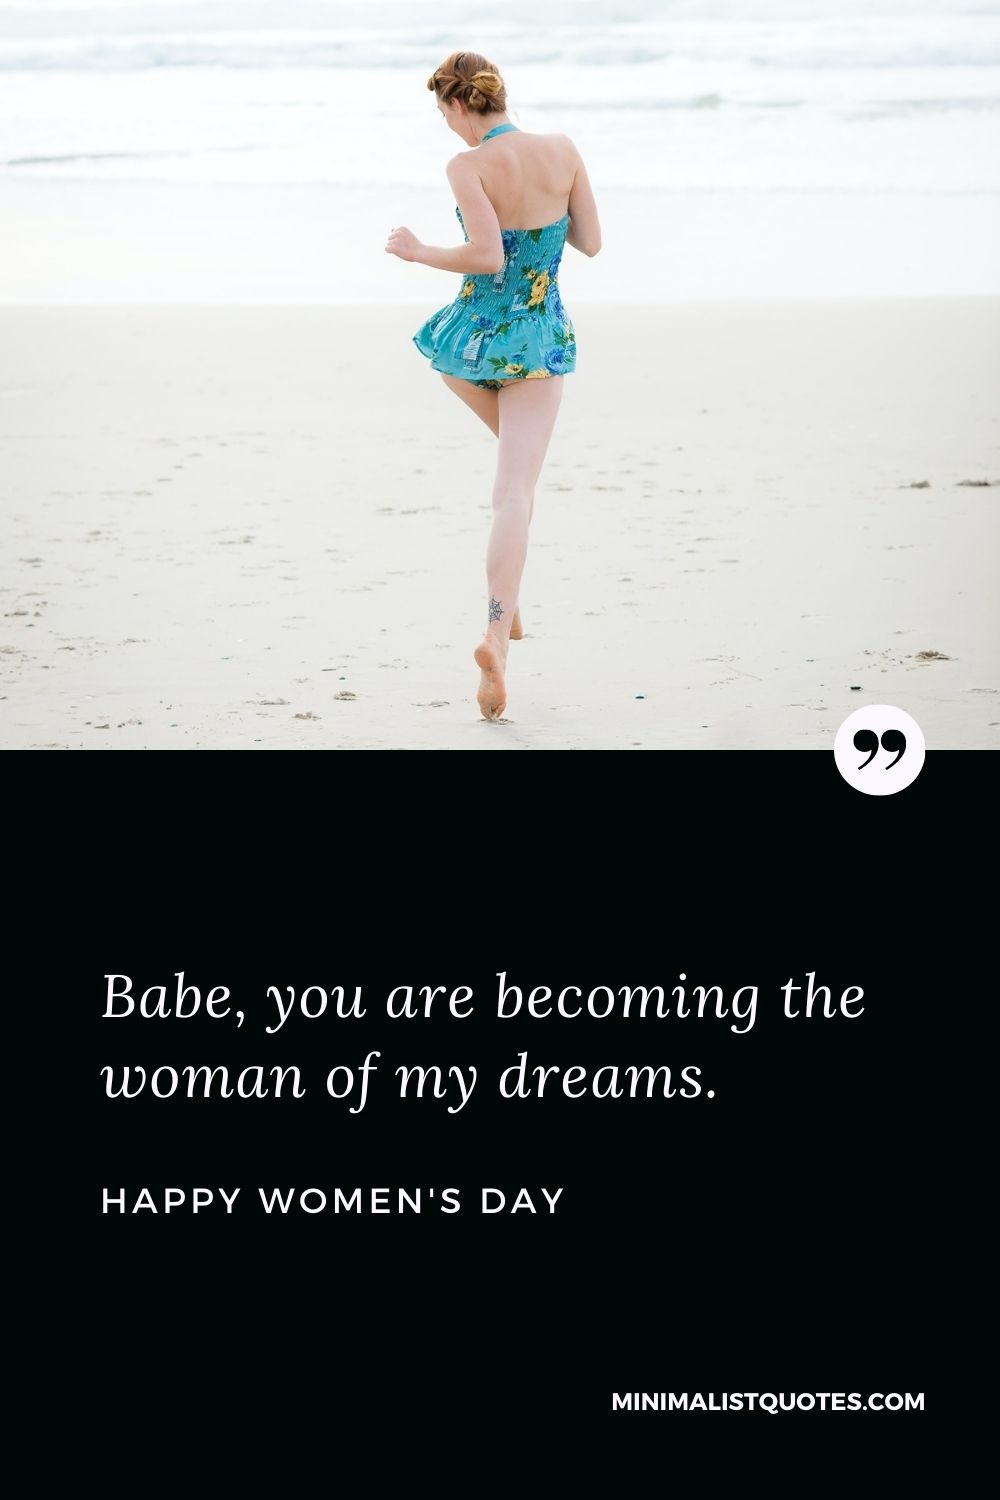 Women's Day Wish: Babe, you are becoming the woman of my dreams.